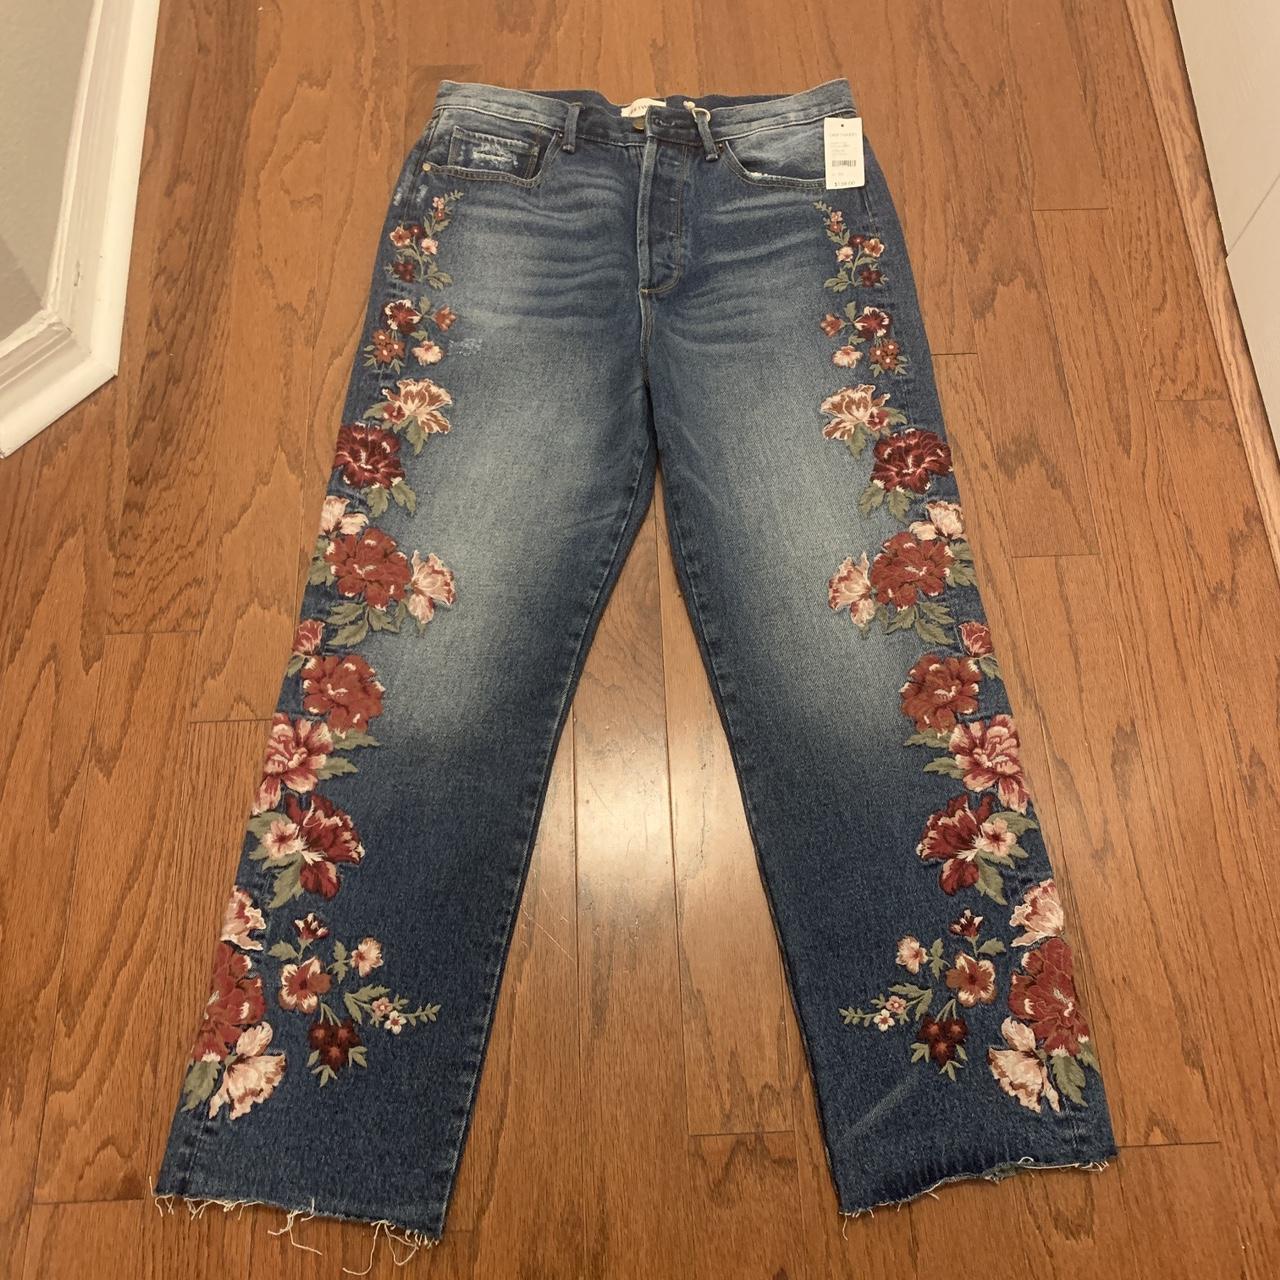 Driftwood Women's Navy and Burgundy Jeans